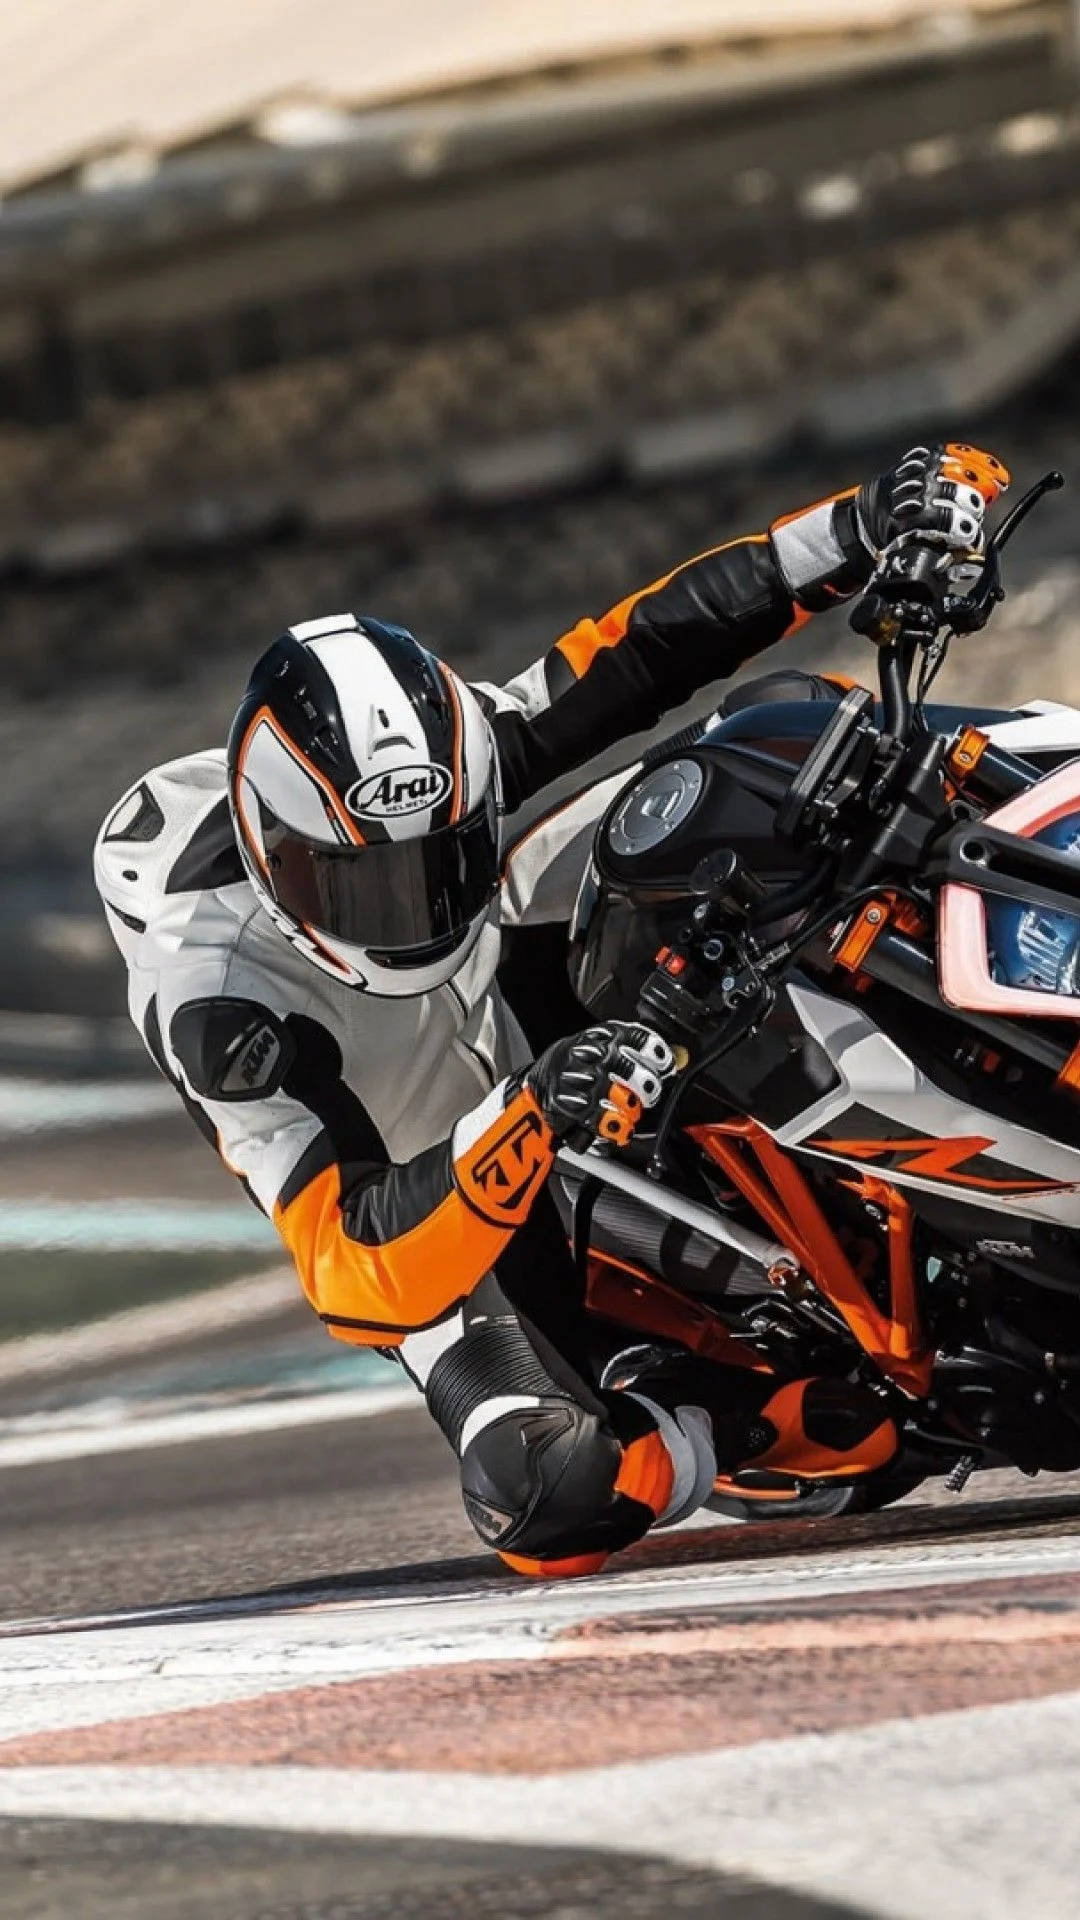 KTM DUKE 390 - A powerful pose is a must after a great ride. The ultimate  combination of style, power, and precision, the KTM 250 Duke gives an  unforgettable riding experience. @the_madman_biker